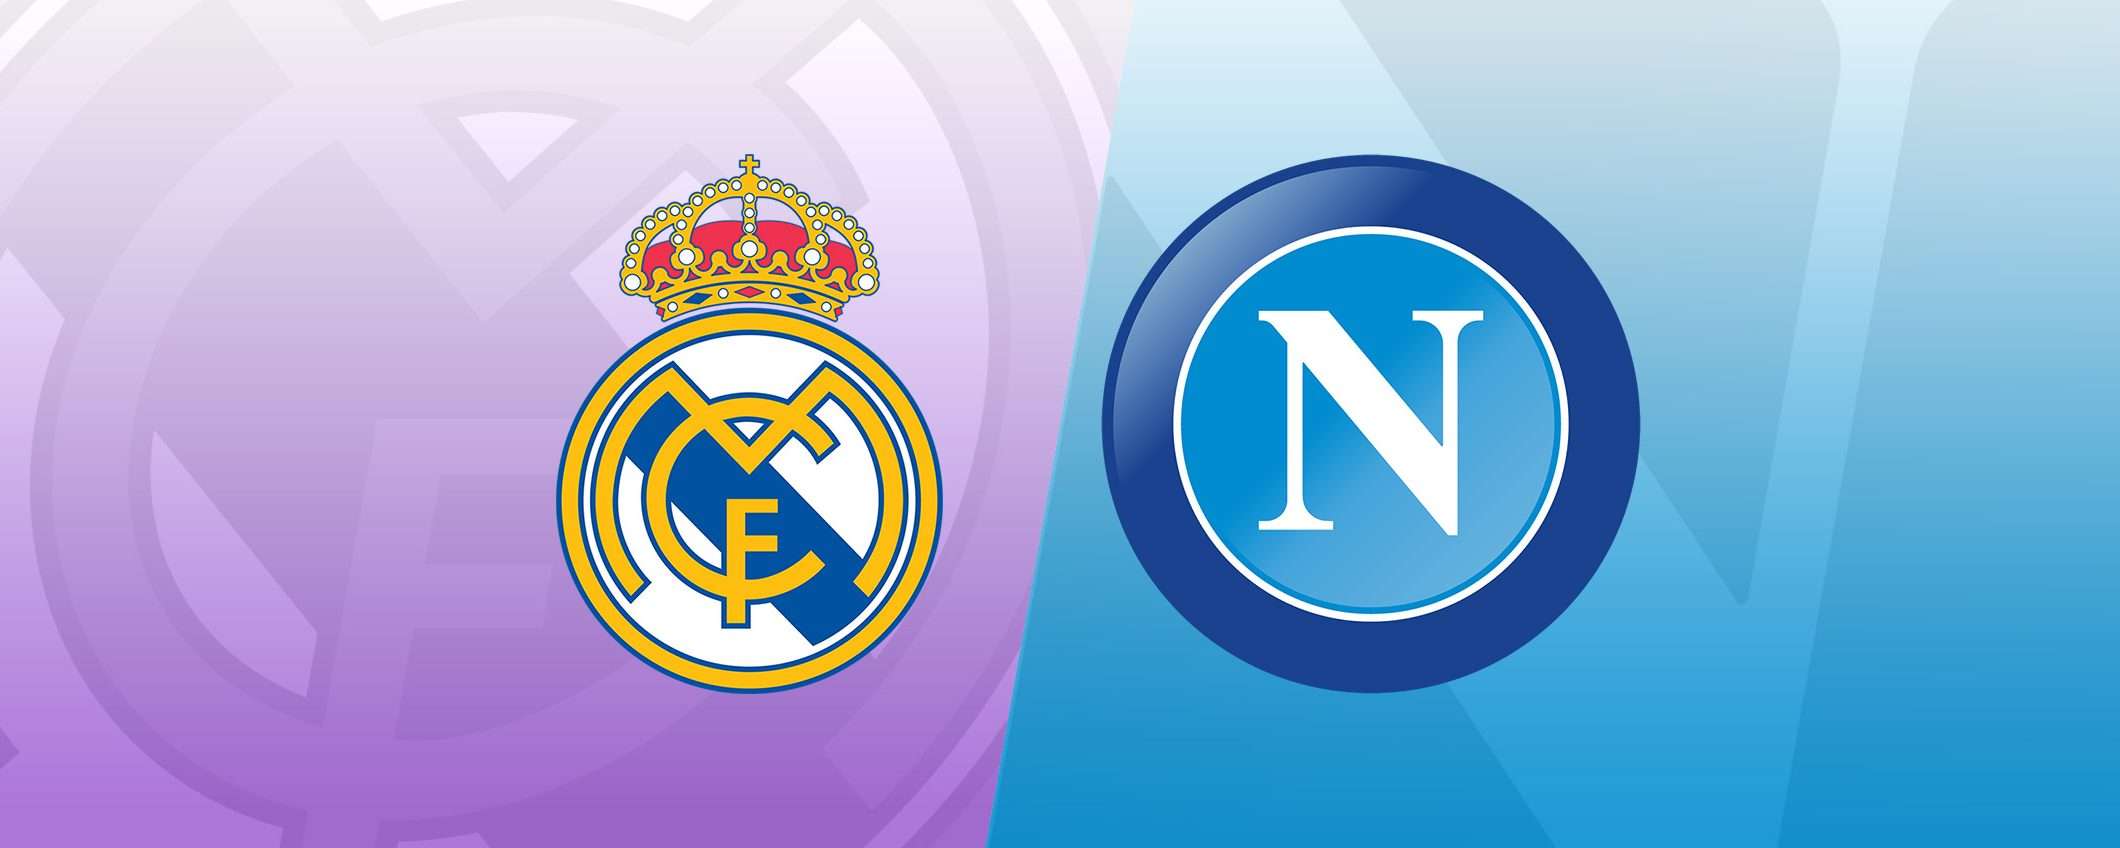 Come vedere Real-Napoli in streaming (Champions)